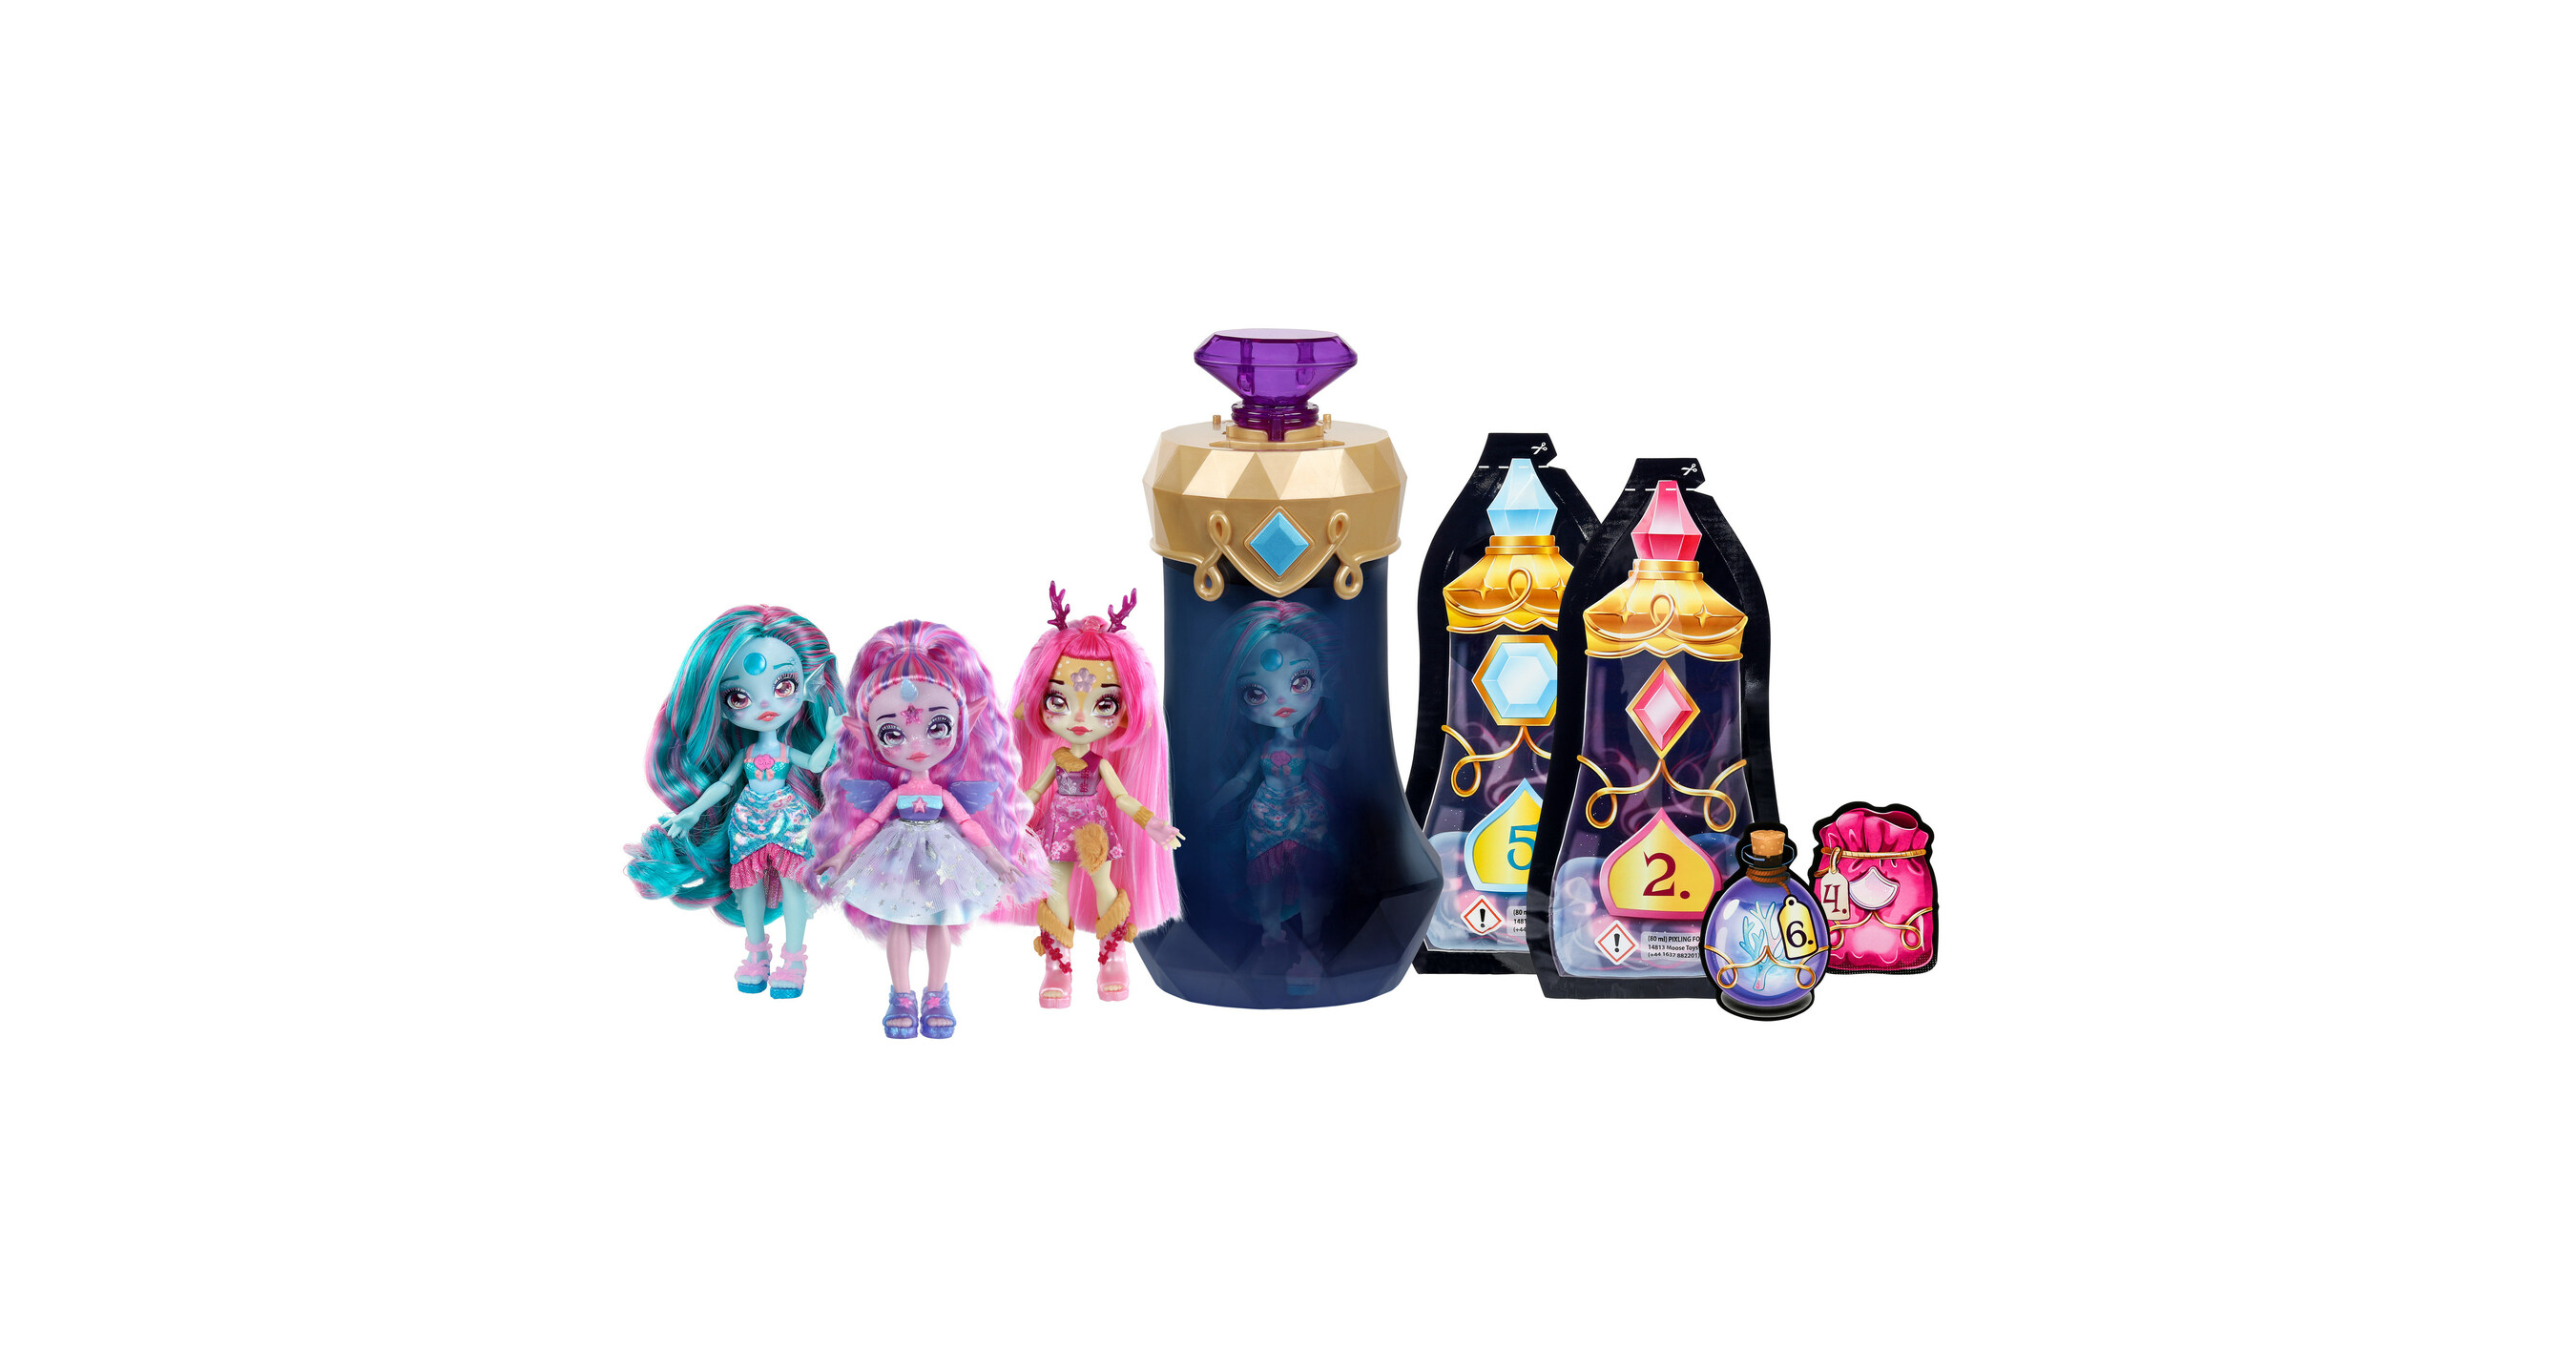 Moose Toys' Award-Winning Magic Mixies Brand Expands with Magic Mixies Magic  Lamp; Enters Doll Category with Magic Mixies Pixlings